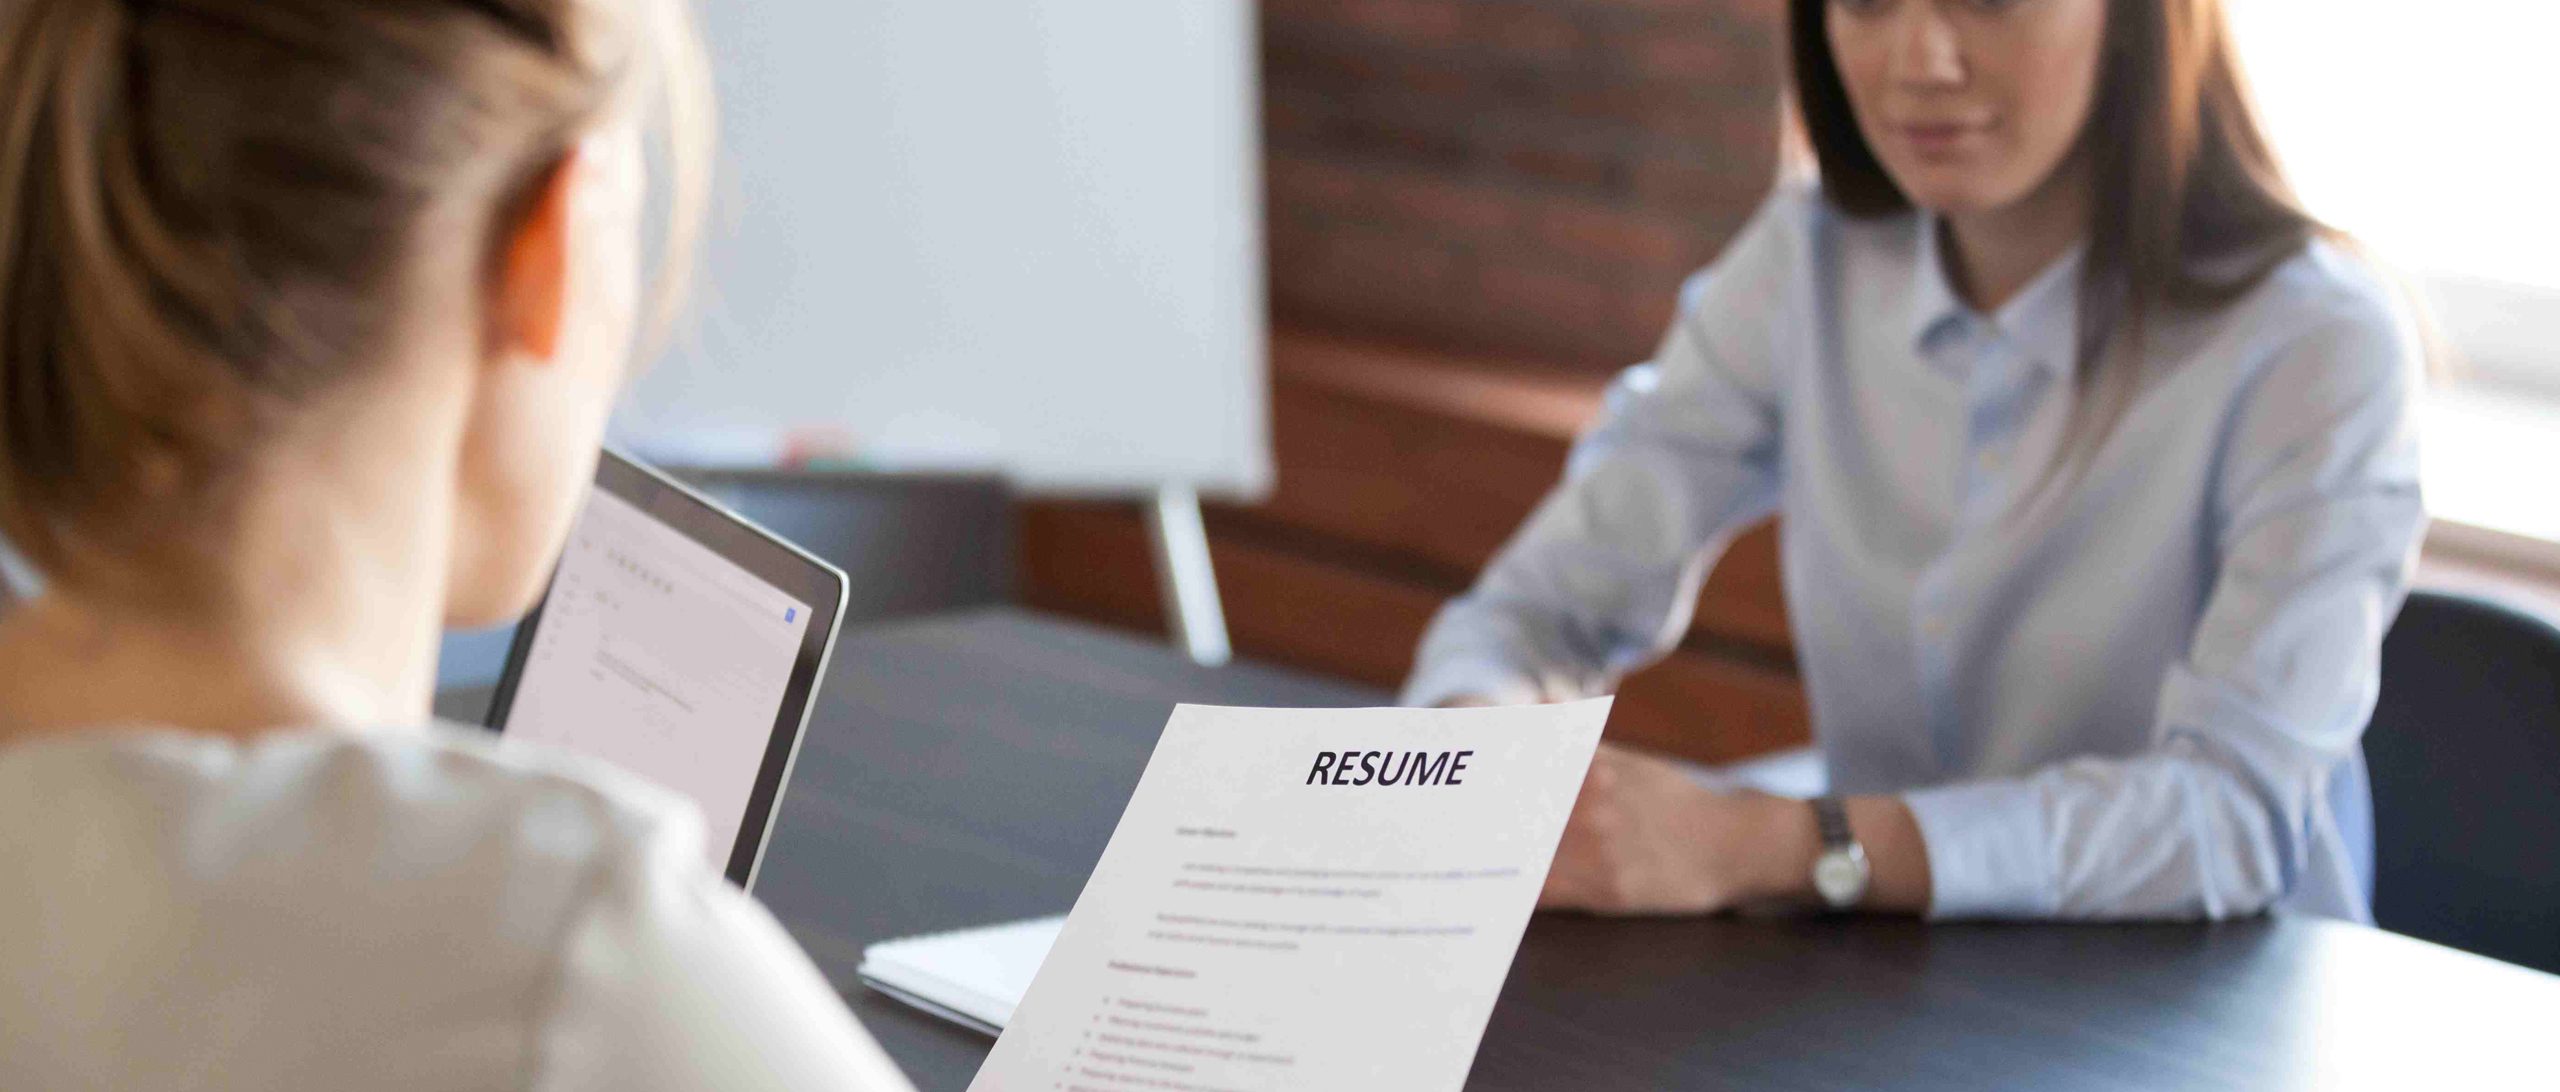 Stay ahead of the competition by frequently updating your resume